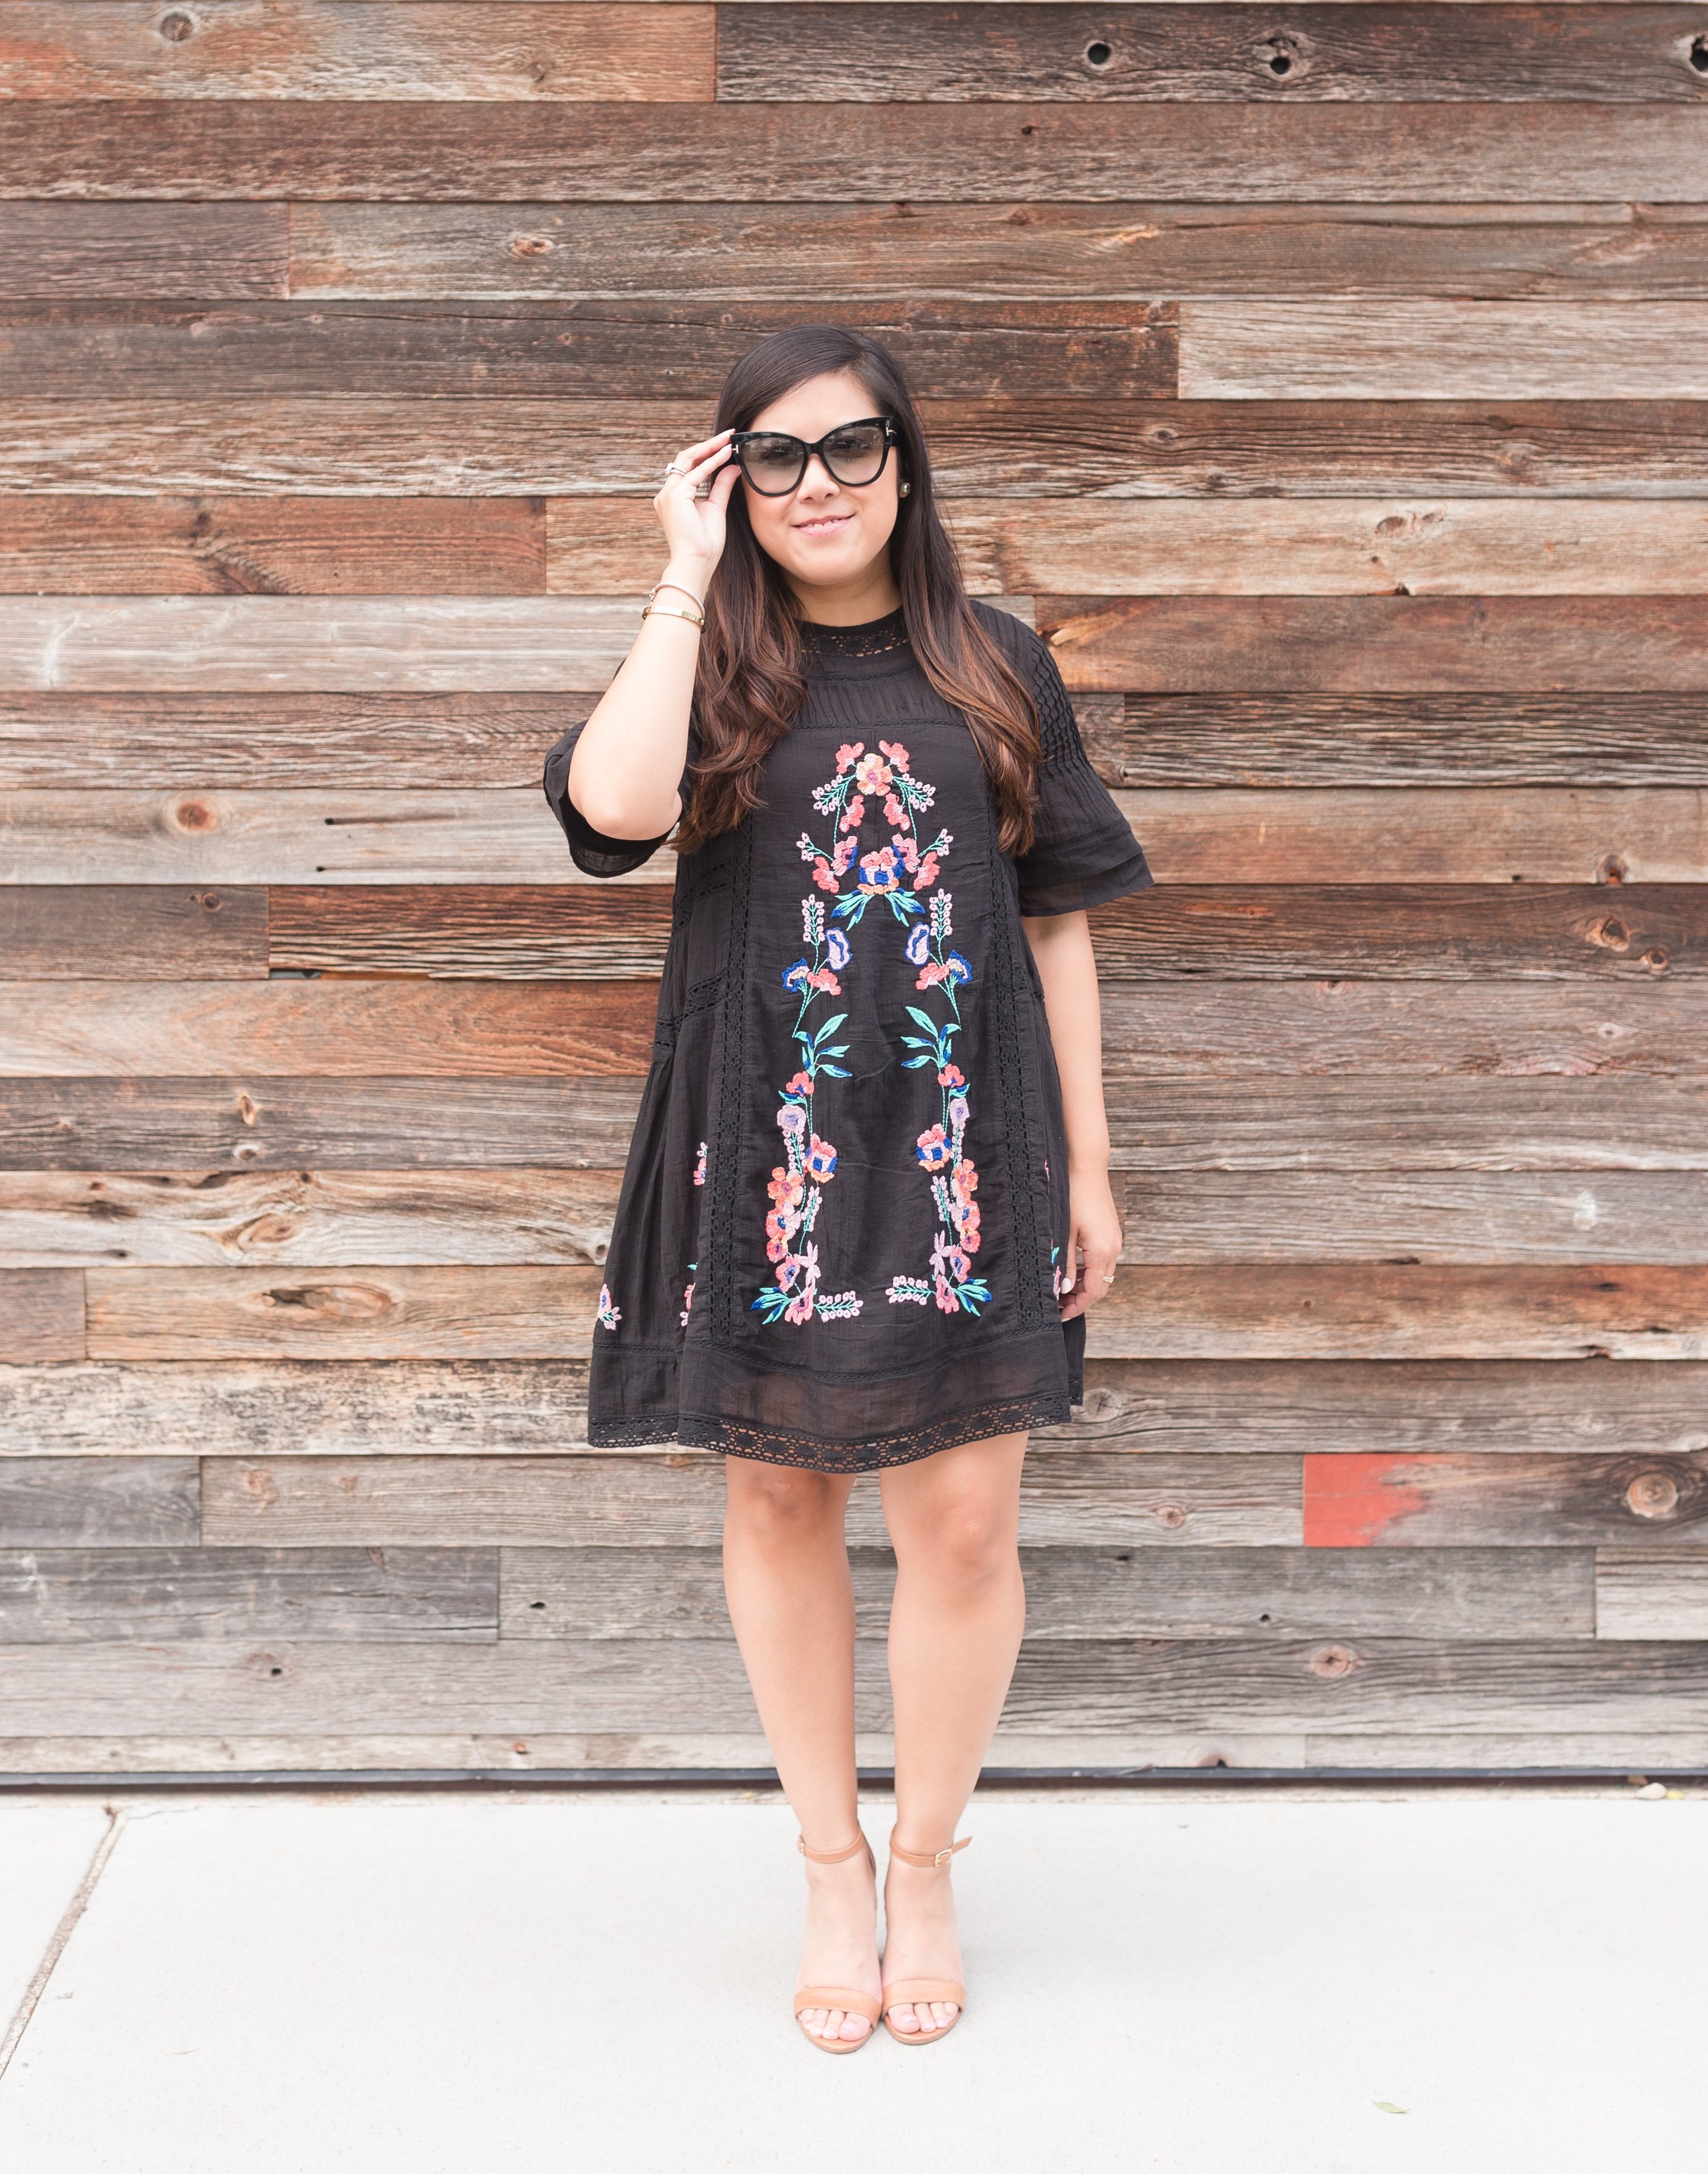 Free People 'Perfectly Victorian' mini dress - Stylista Esquire @stylistaesquire